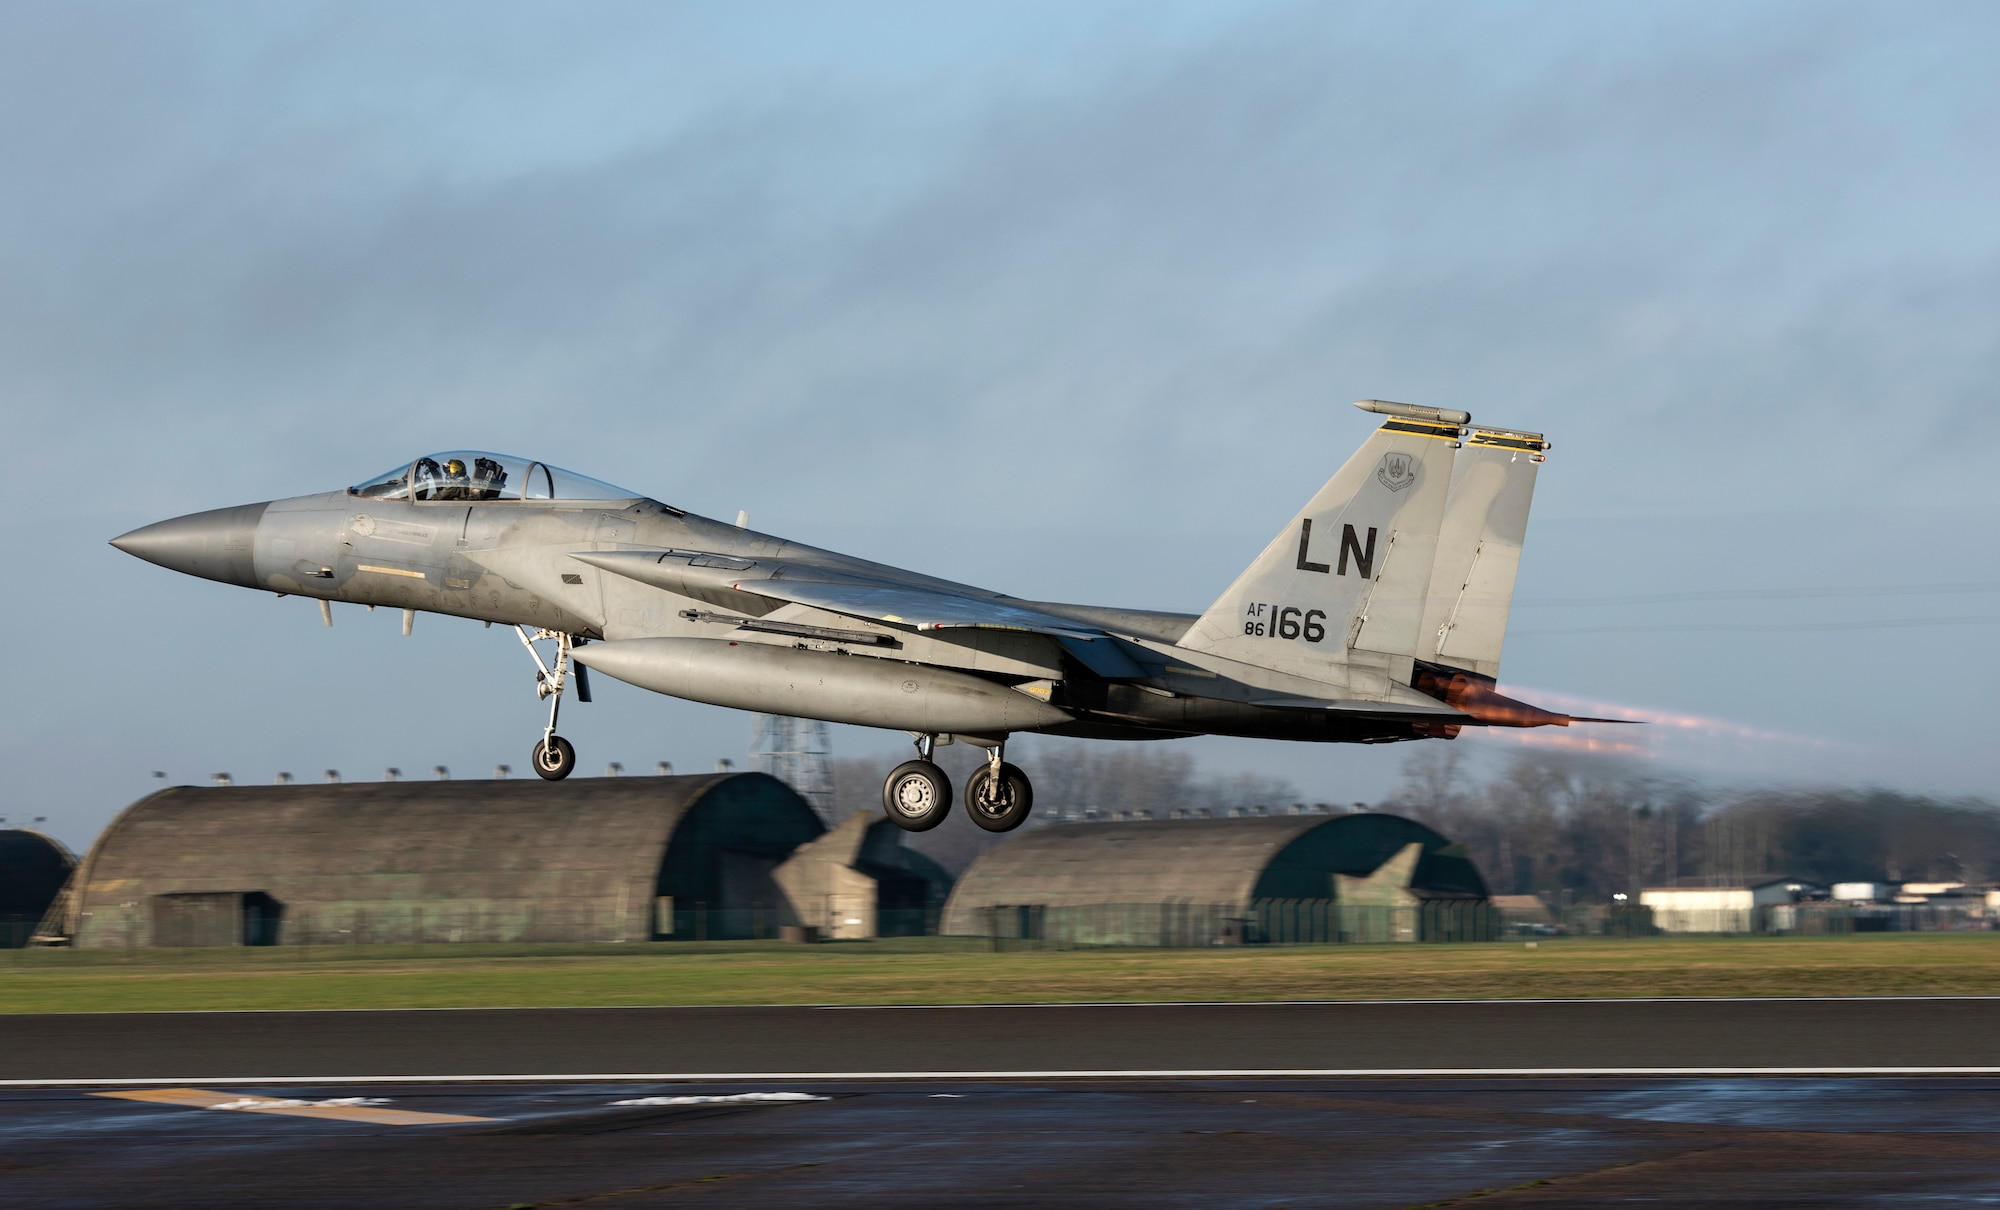 An F-15C Eagle assigned to the 493rd Fighter Squadron takes off at Royal Air Force Lakenheath, England, Dec. 8, 2020. 48th Fighter Wing pilots participated in a live missile fire exercise, gaining combat representative training that can't be fully imitated in a simulation during day-to-day training. (U.S. Air Force photo by Airman 1st Class Jessi Monte)